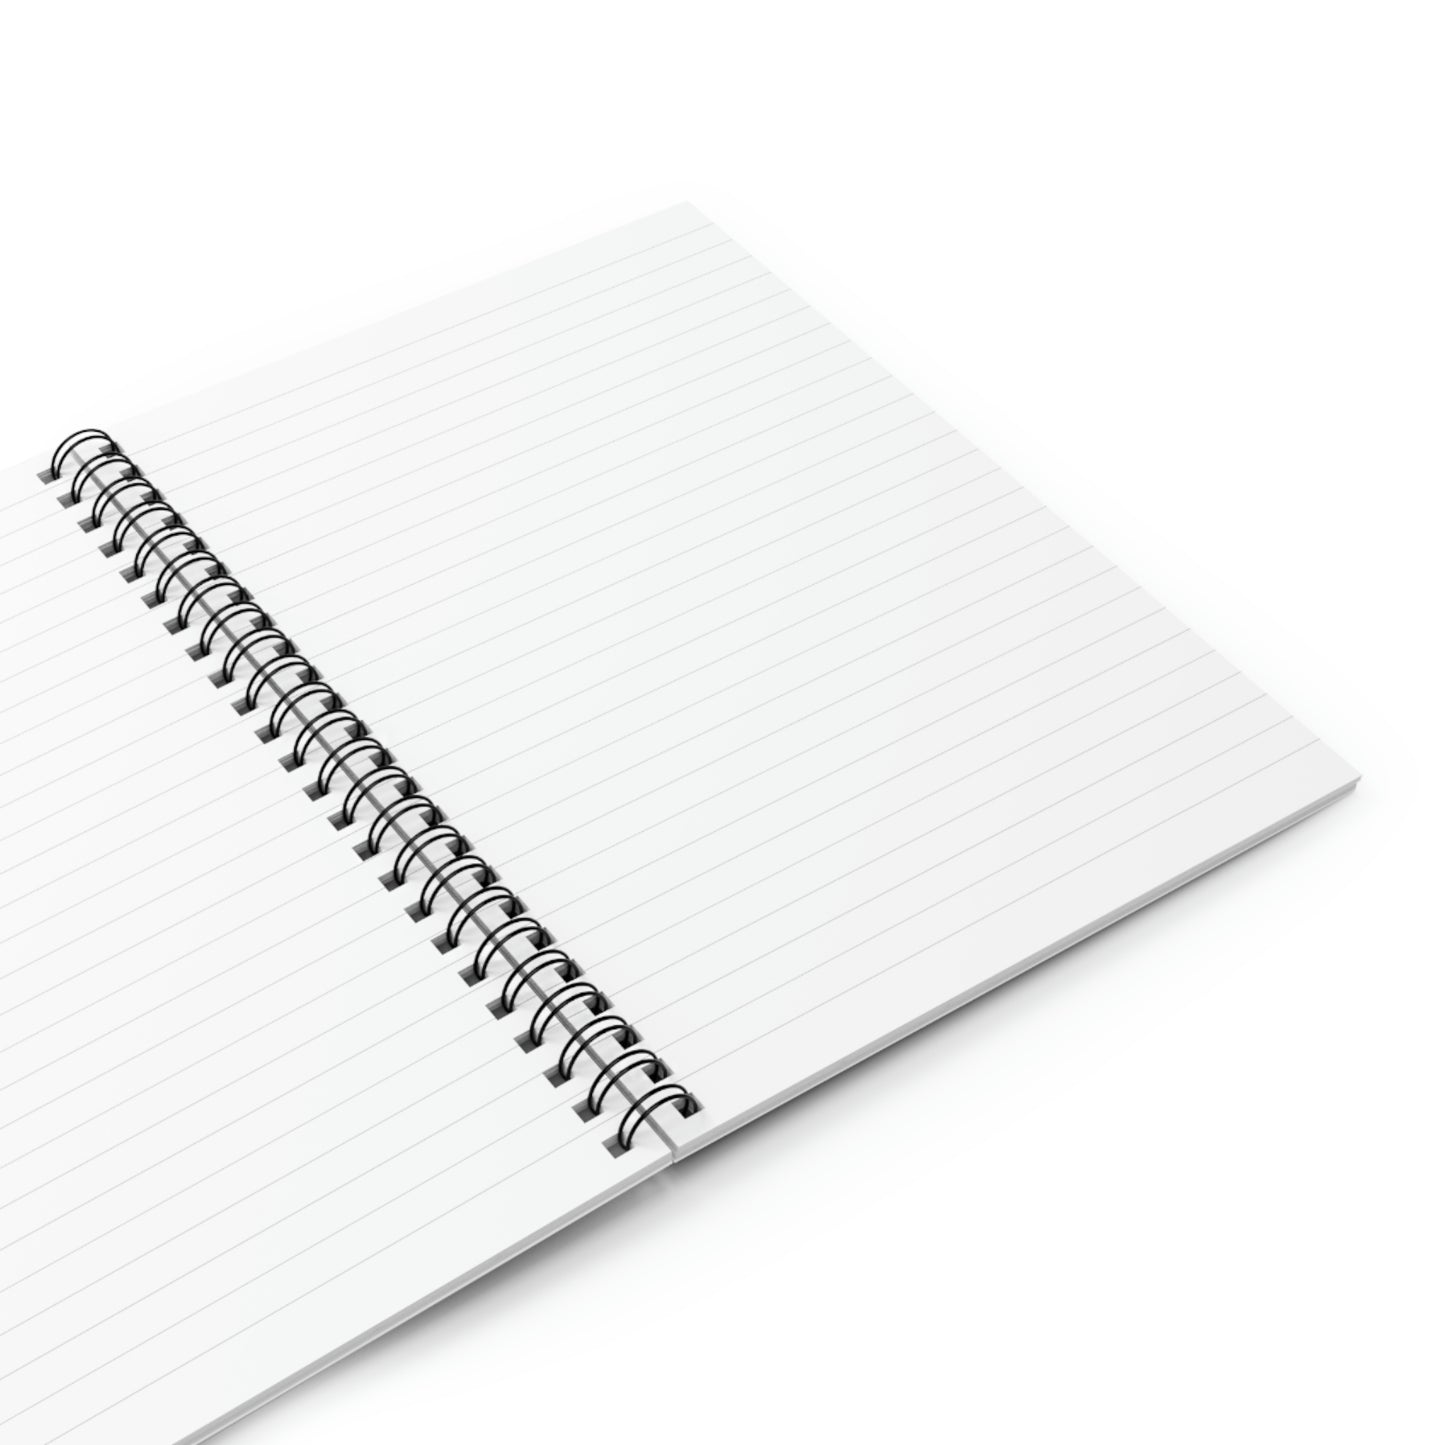 Awesome Ants Spiral Notebook - Ruled Line